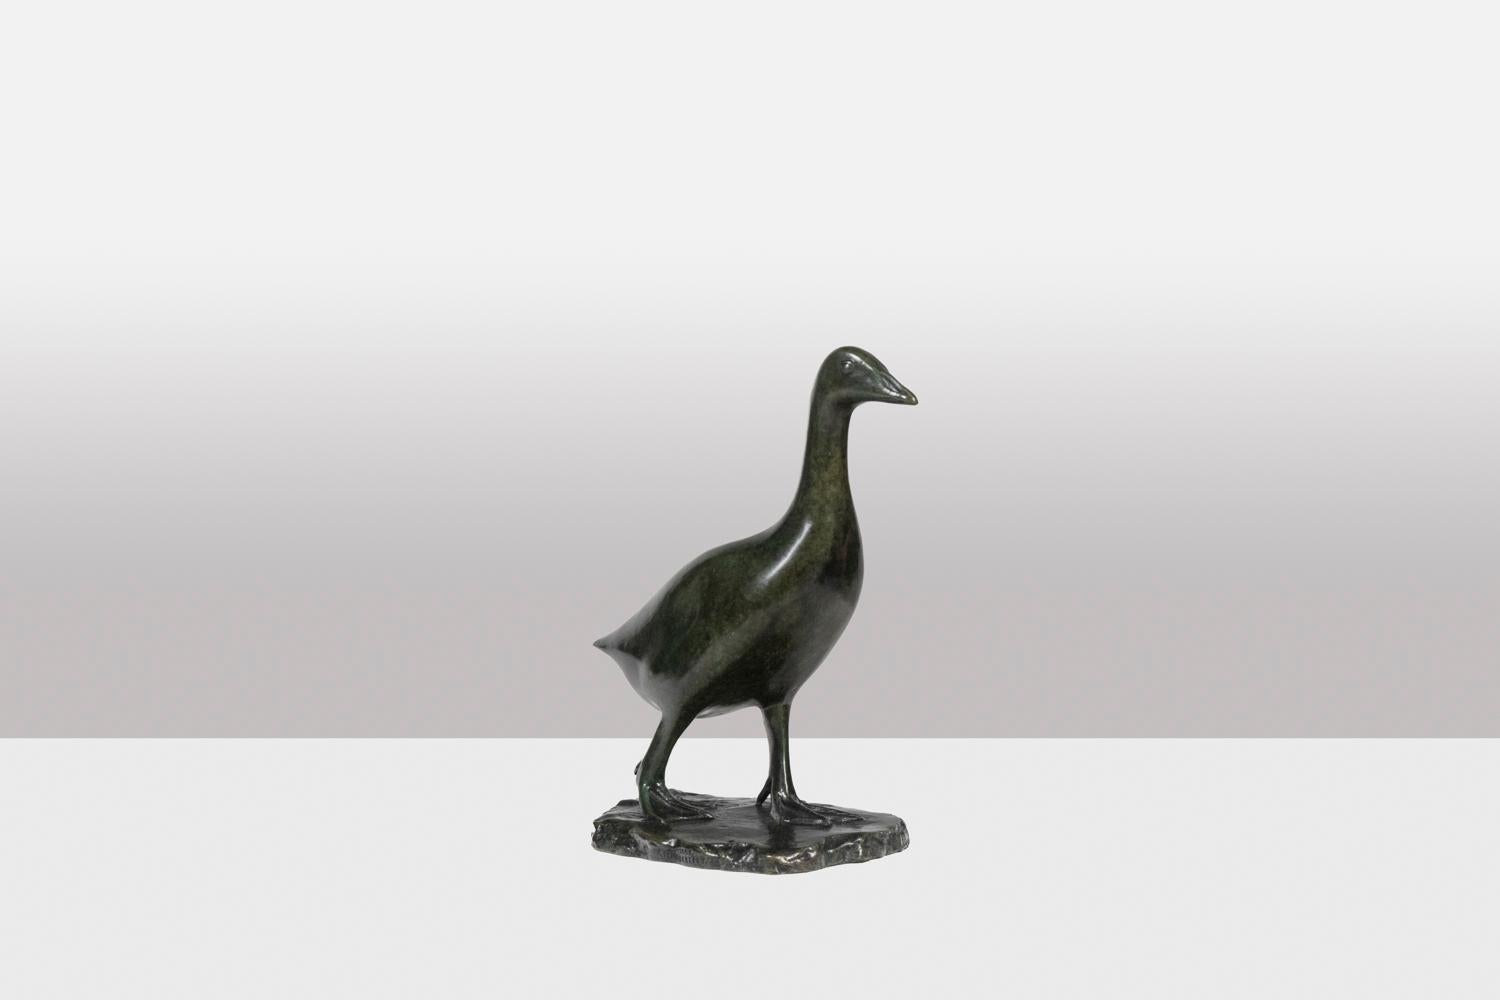 François Pompon, signed.
Atelier Valsuani, edited by.

Sculpture titled “Oie”. Bronze with green patina, lost wax casting.

Stamp of the Foundry “cire perdue C. Valsuani“, on the plinth of the terrace. Reproduction dated 2006. Numbered